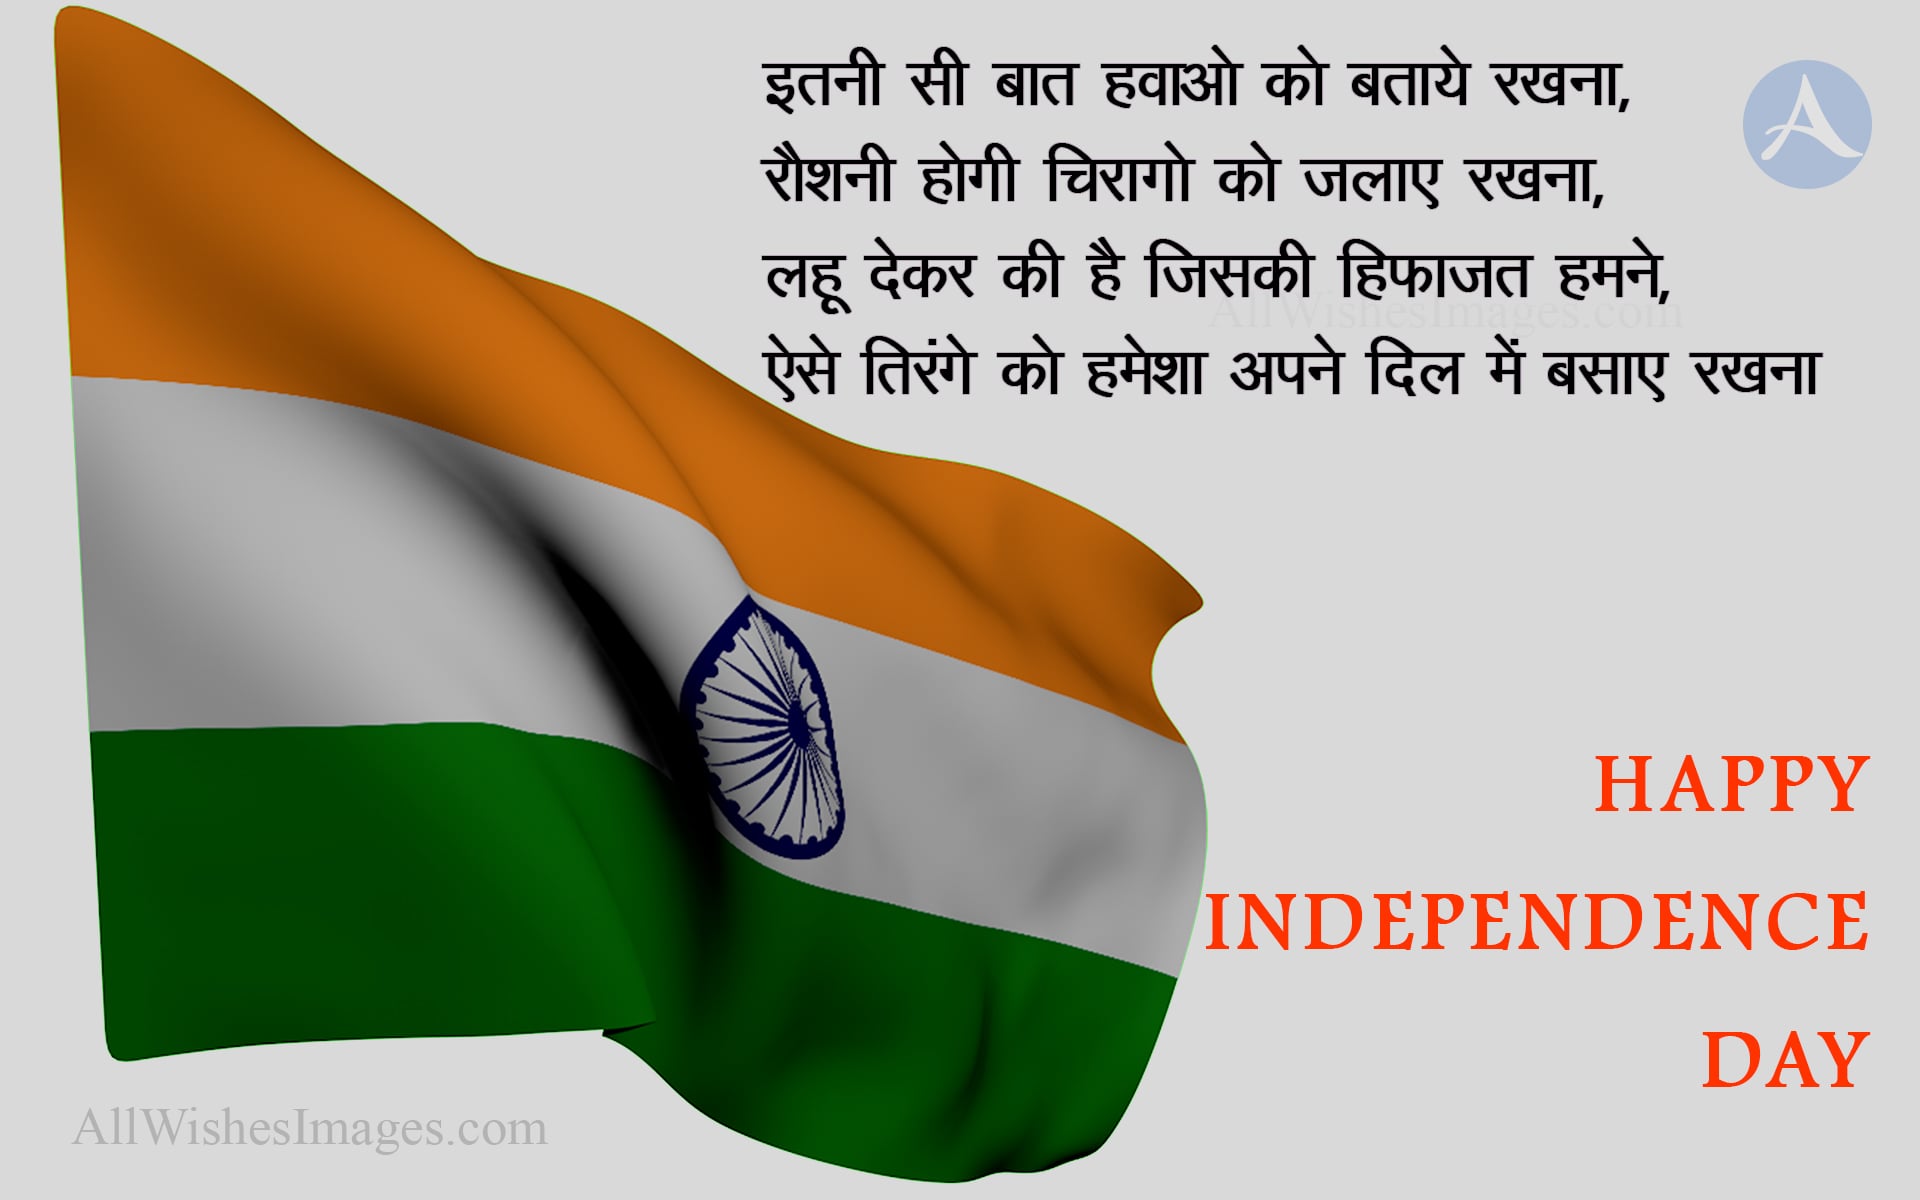 independence day 3 - All Wishes Images - Images for WhatsApp